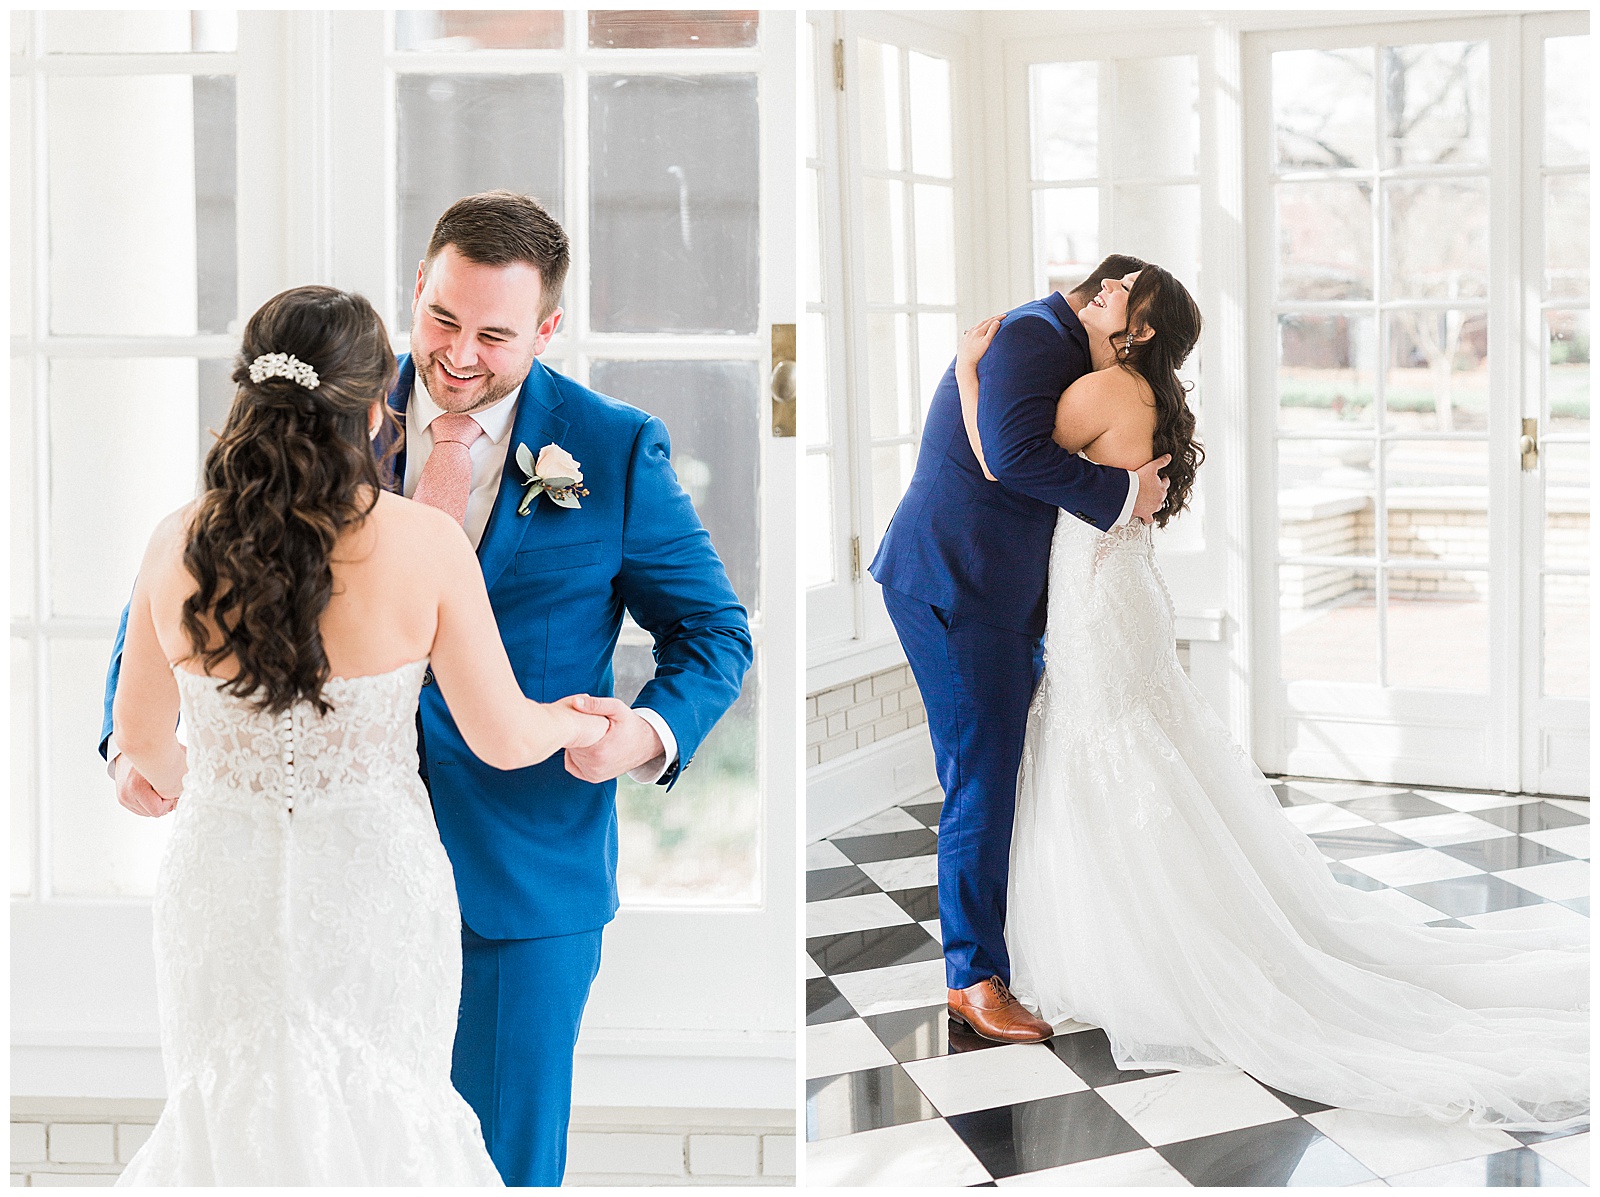 Groom's Adorable First Look of Bride's Lace Wedding Dress from Light and Airy Outdoor Wedding at Separk Mansion in Gastonia, NC | Kevyn Dixon Photography